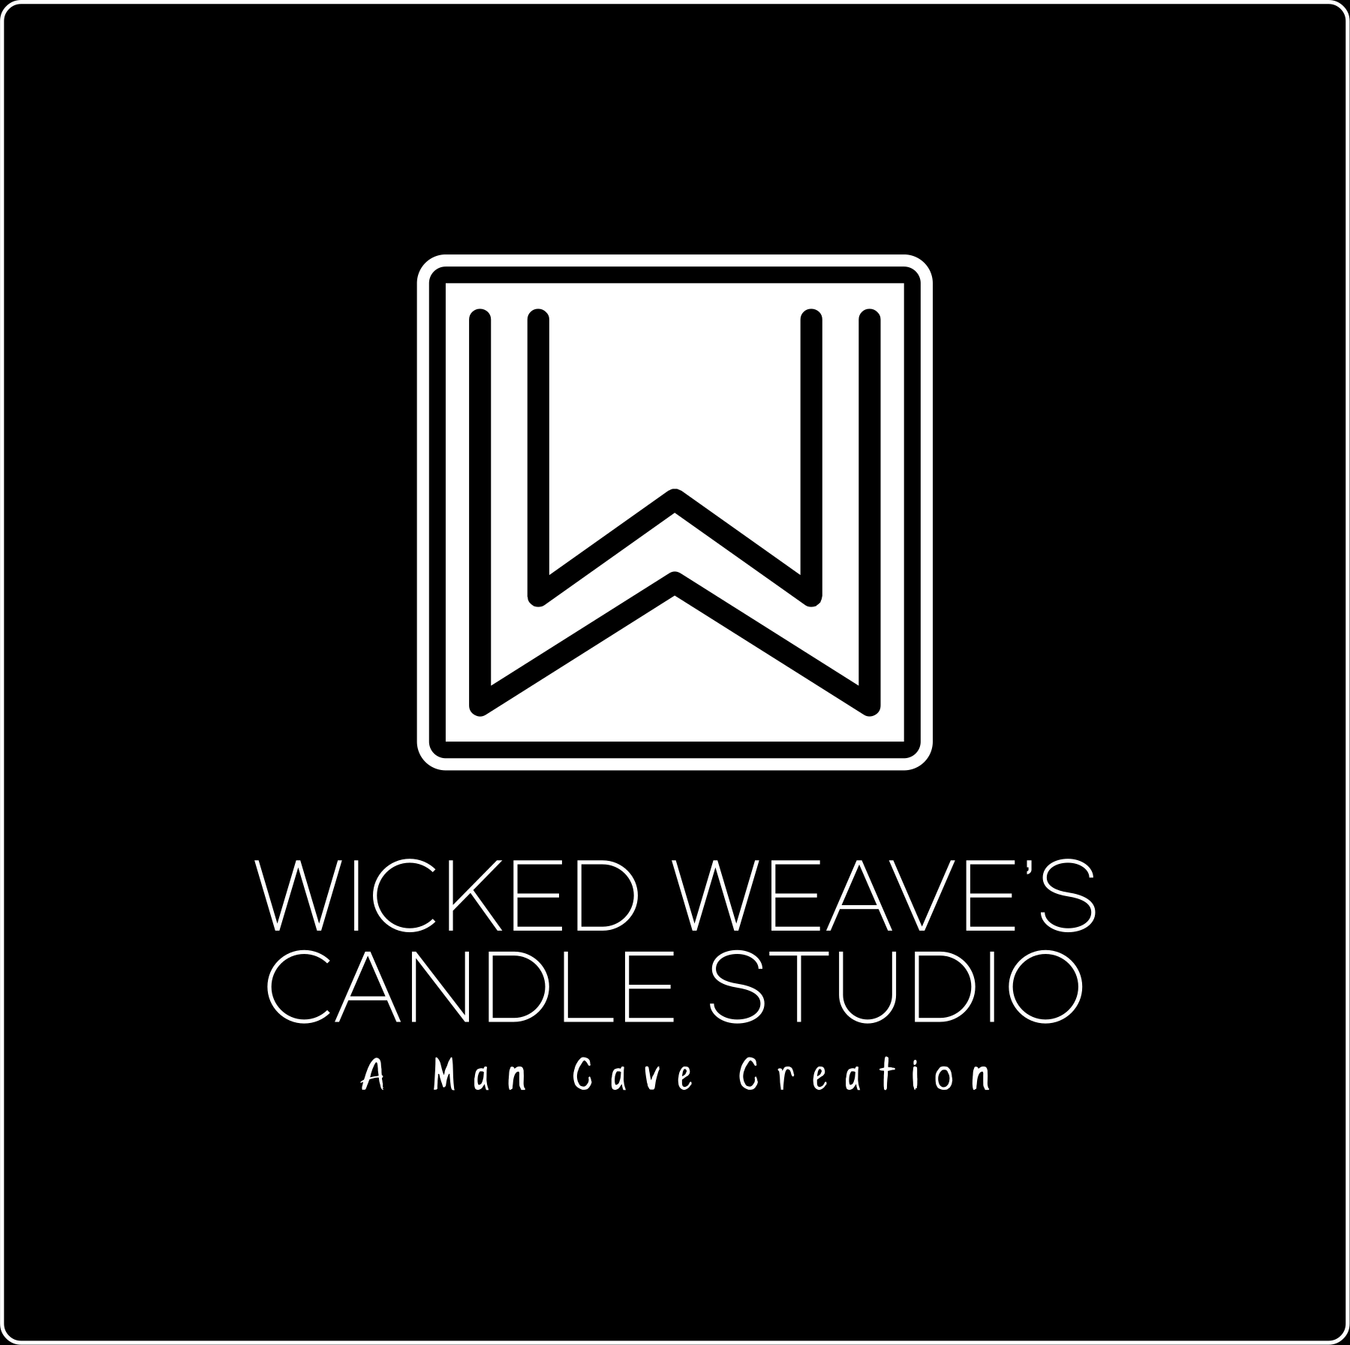 Wicked Weave’s Candle Studio